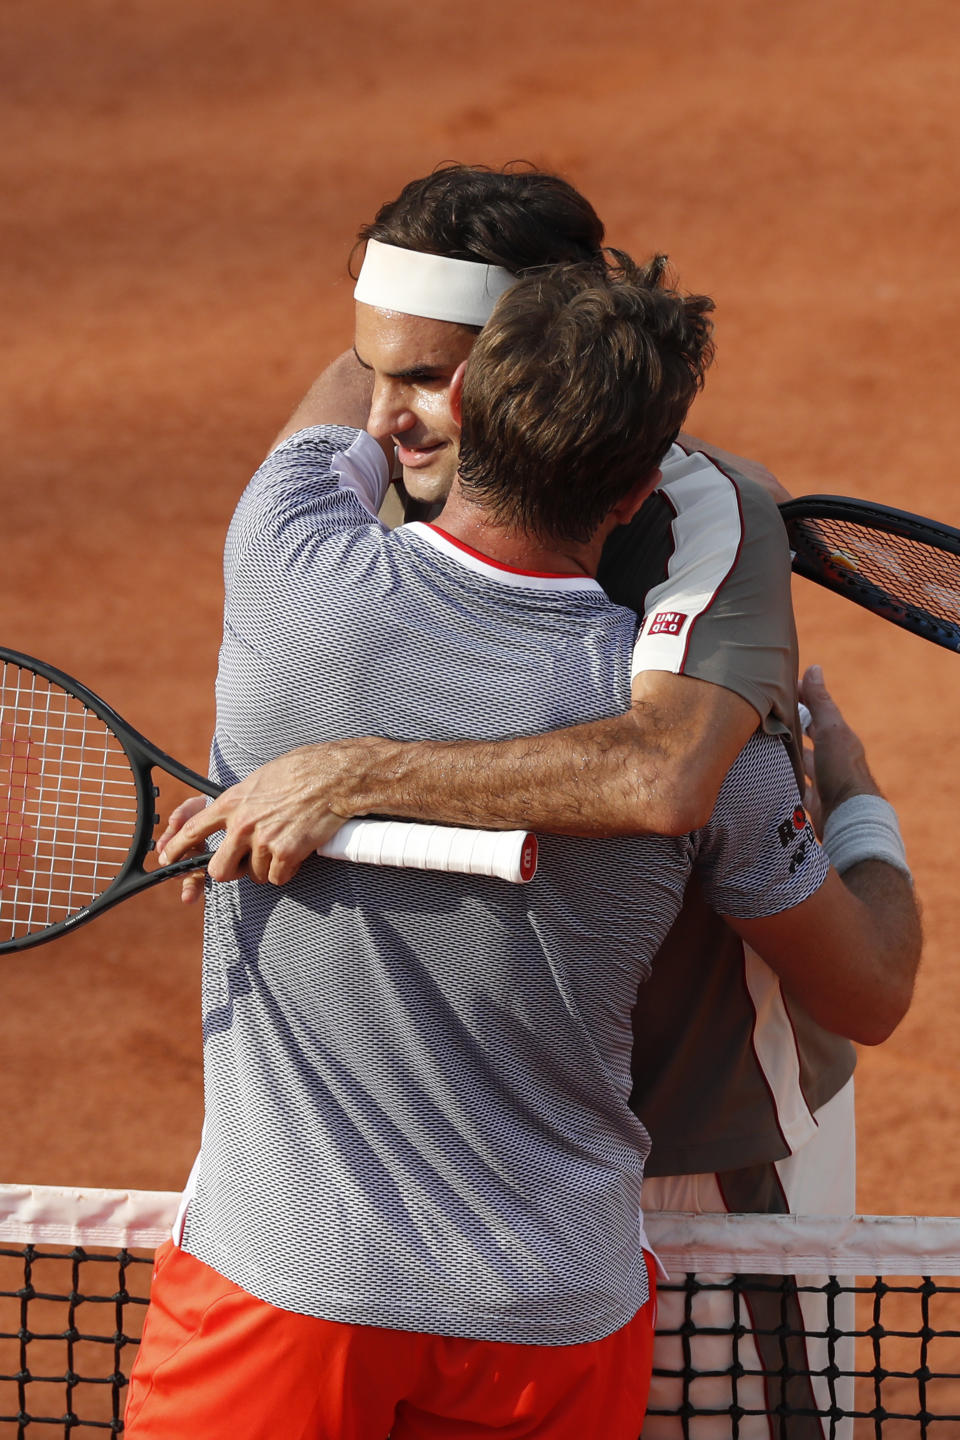 Switzerland's Roger Federer and Switzerland's Stan Wawrinka hug after their quarterfinal match of the French Open tennis tournament against which Federer won in four sets, 7-6 (7-4), 4-6, 7-6 (7-5), 6-4, at the Roland Garros stadium in Paris, Tuesday, June 4, 2019. (AP Photo/Jean-Francois Badias)